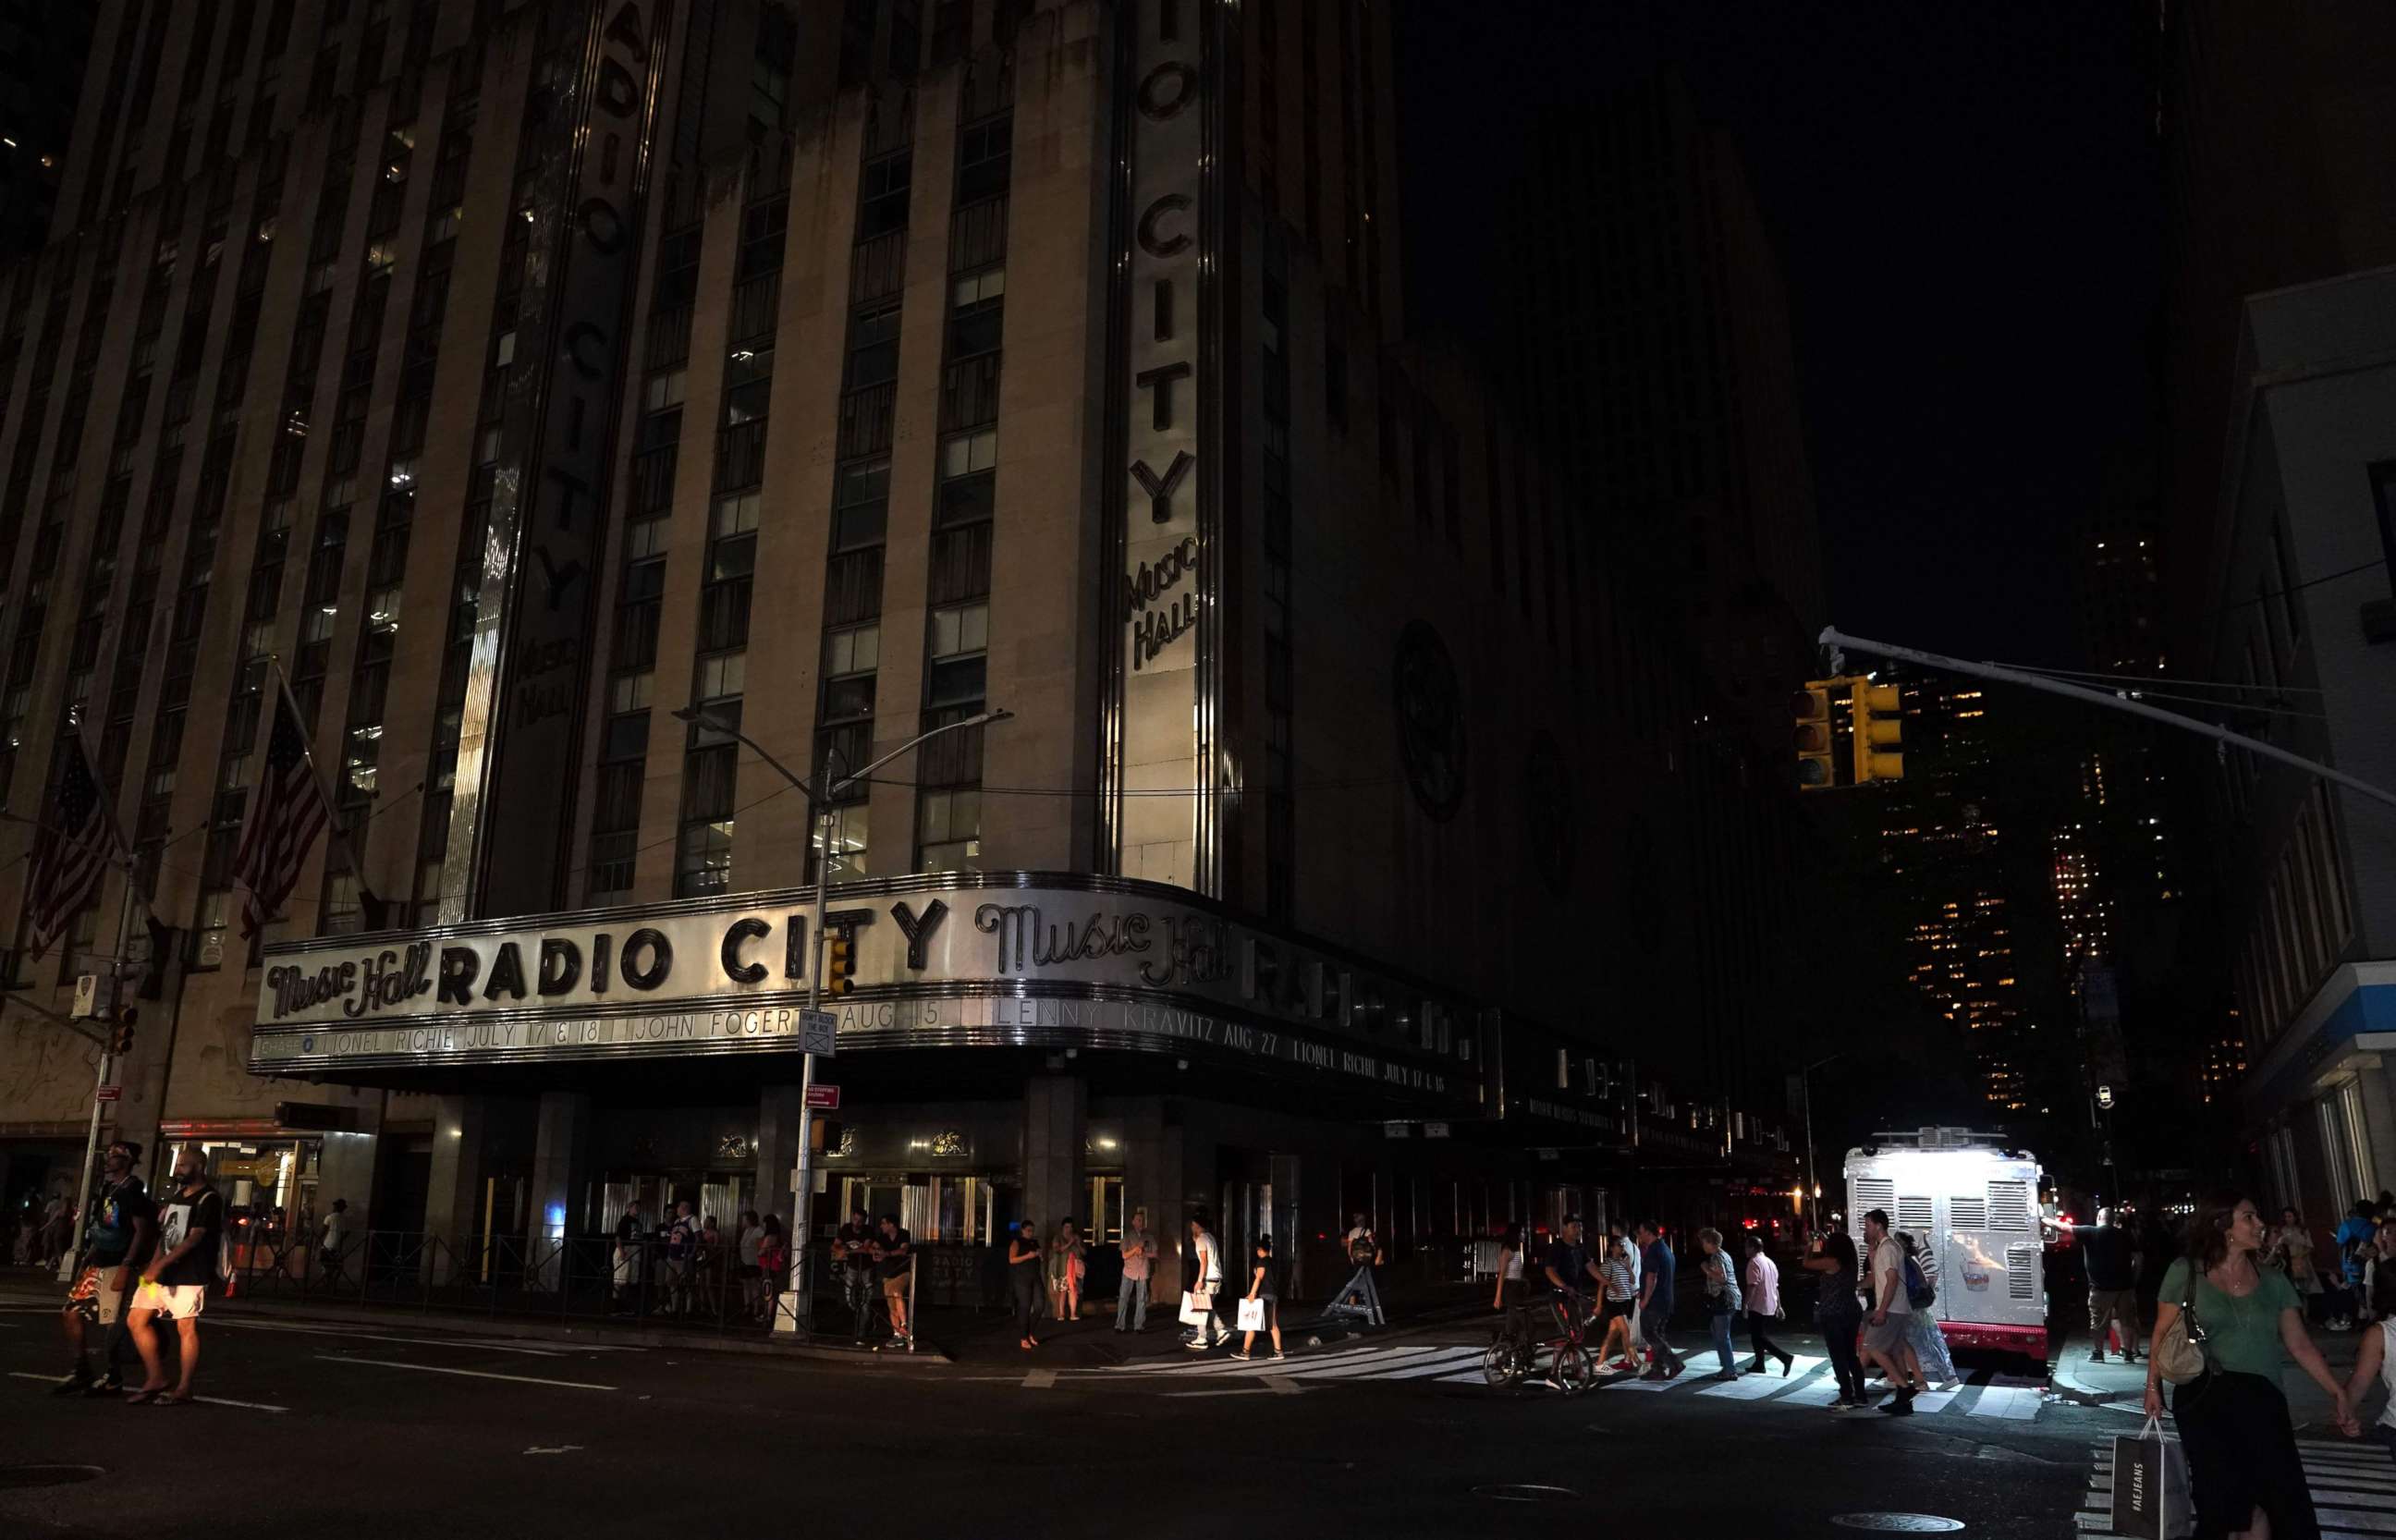 PHOTO: People walk past Radio City Music Hall in the dark during a major power outage affecting parts of New York, July 13, 2019.